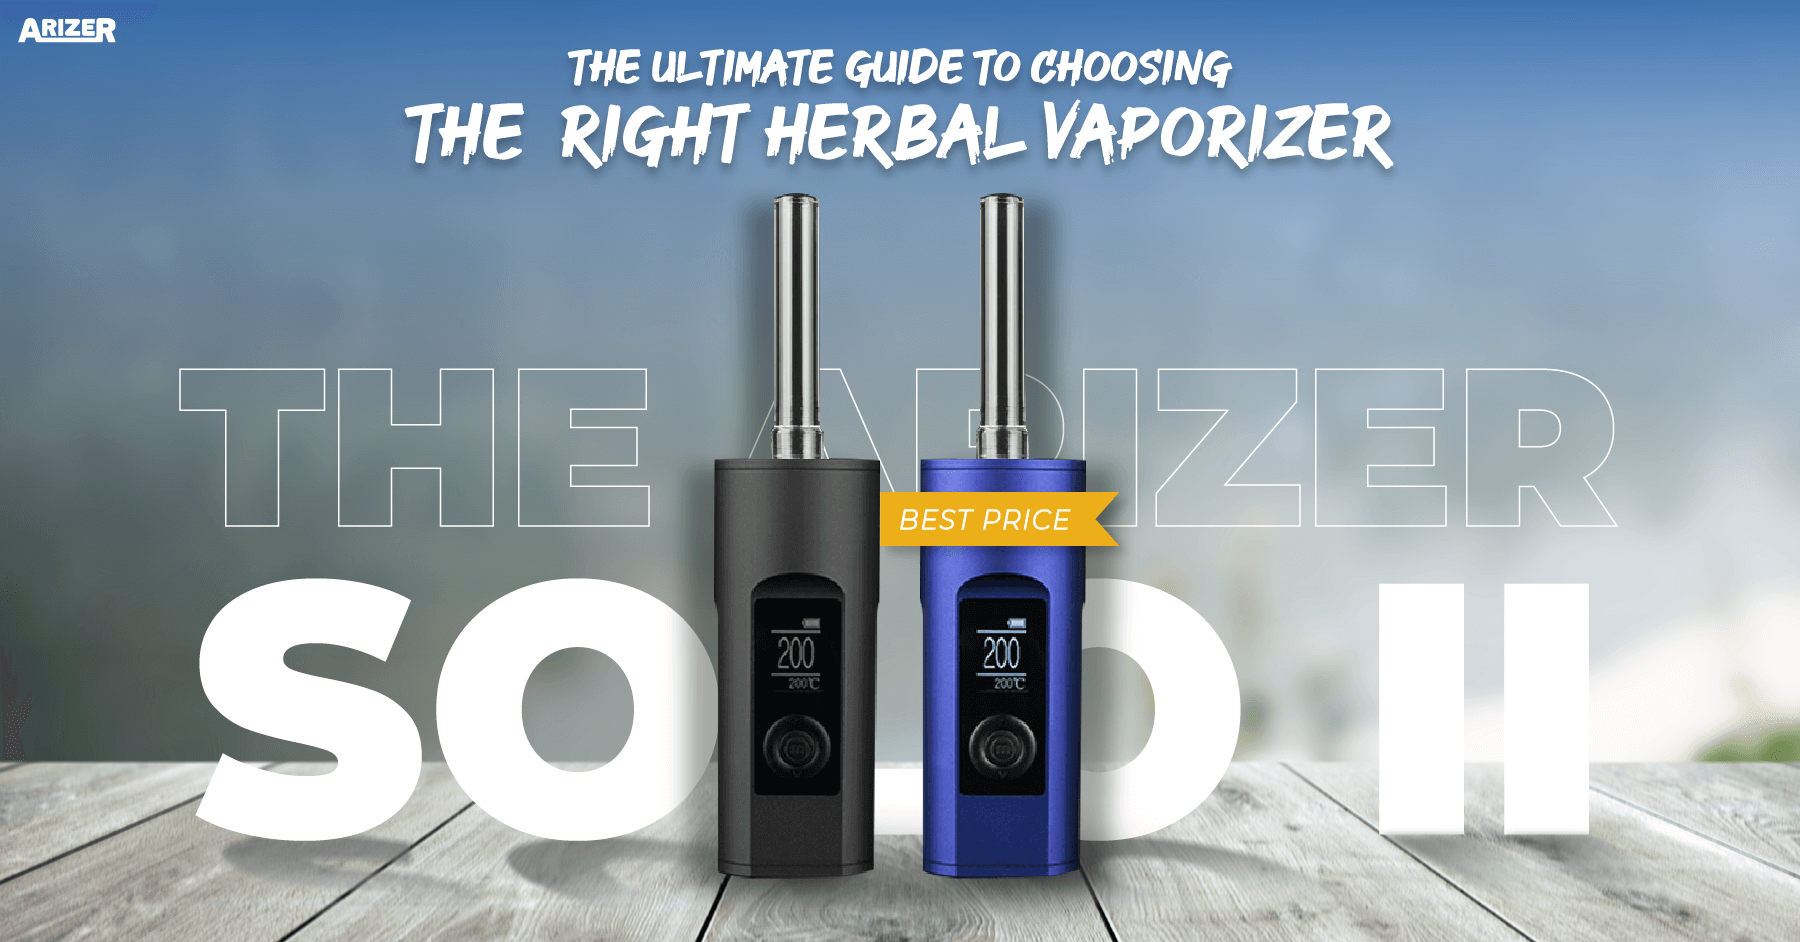 The-Ultimate-Guide-to-Choosing-the-Right-Hеrbal-Vaporizеr-Arizer-Solo2